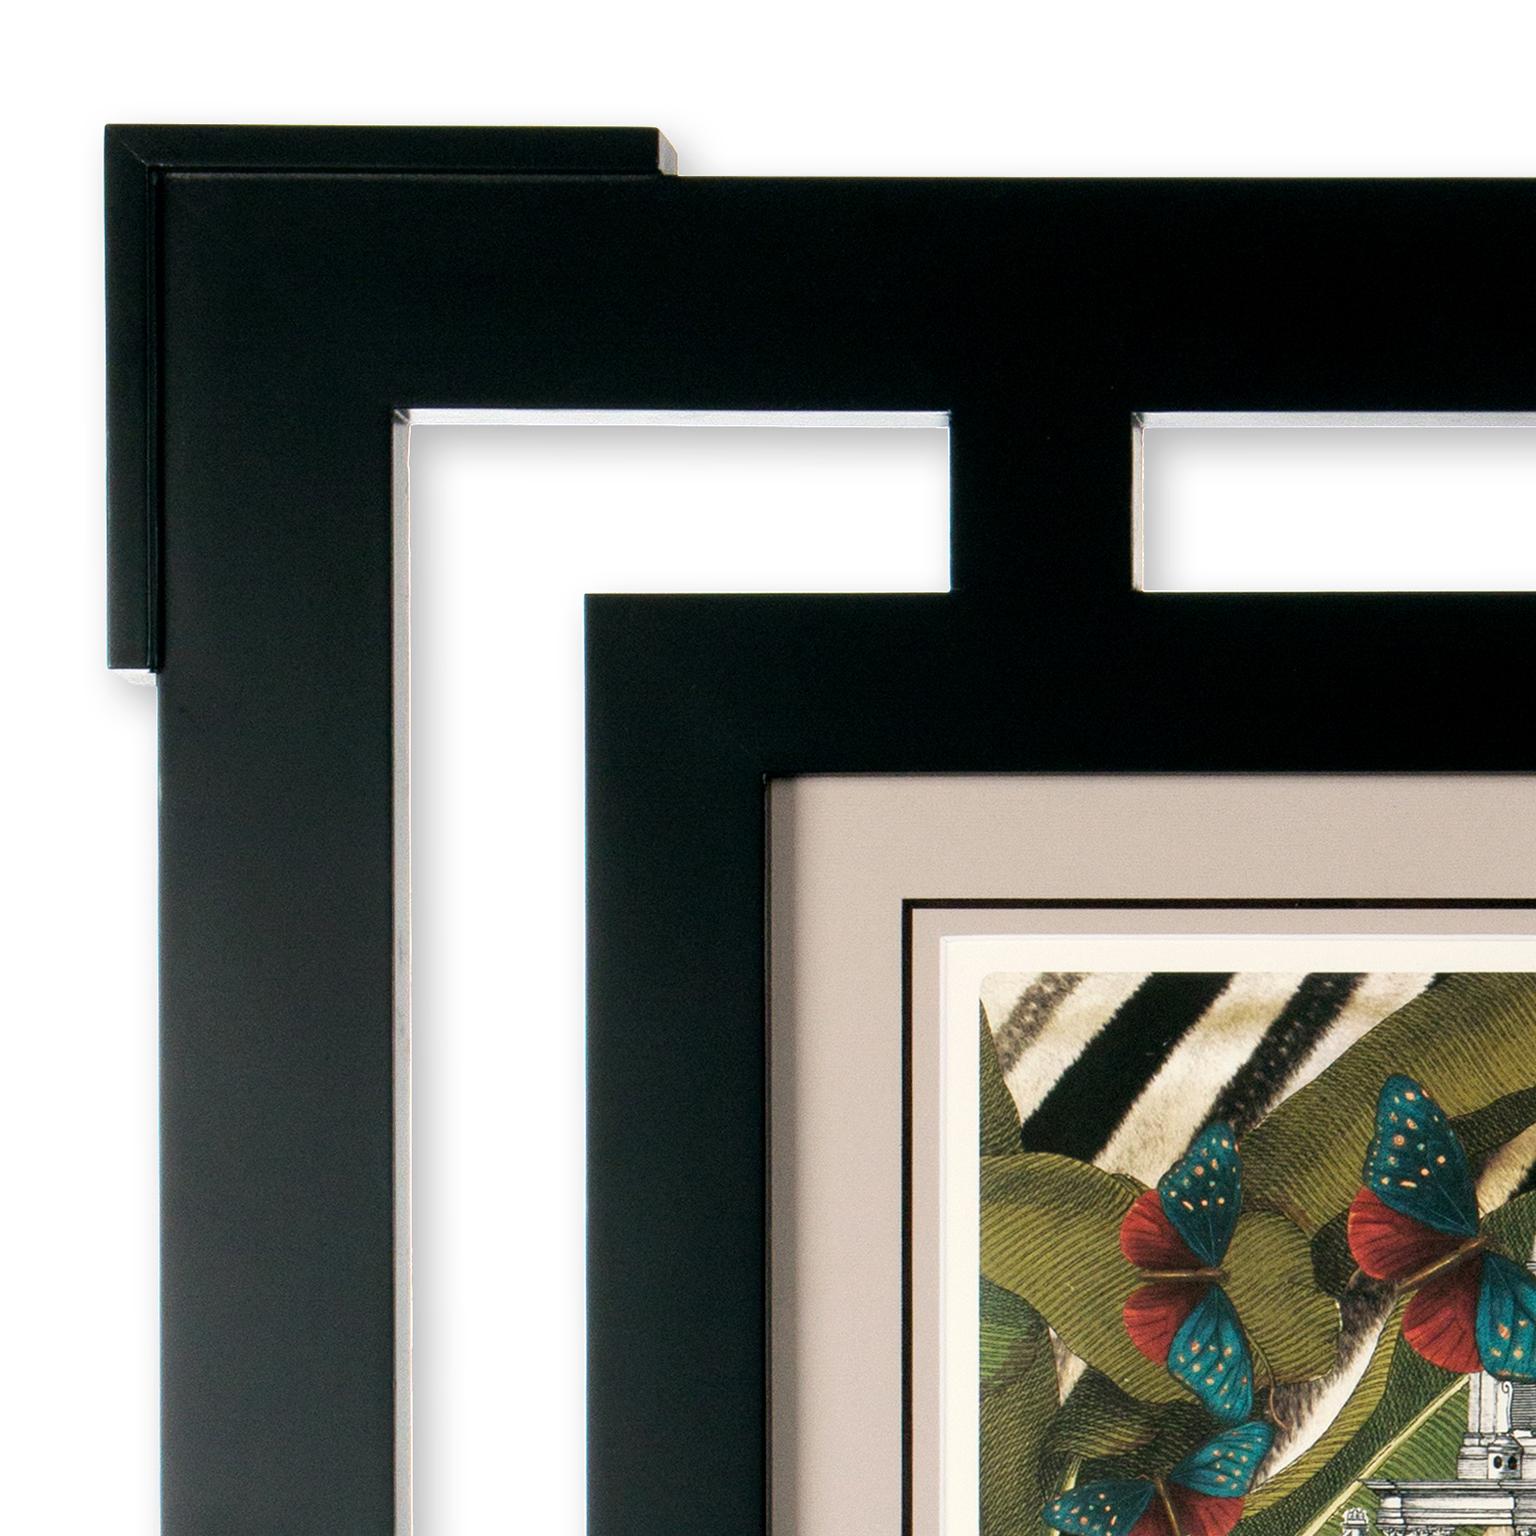 Multicolor numbered giclèe print on 100% cotton paper. Hand detailed taupe passepartout. Lacquered black Tulipier wood designer frame.
From the Jungle Dome collection designed by Massimiliano Giornetti long time creative director for Salvatore